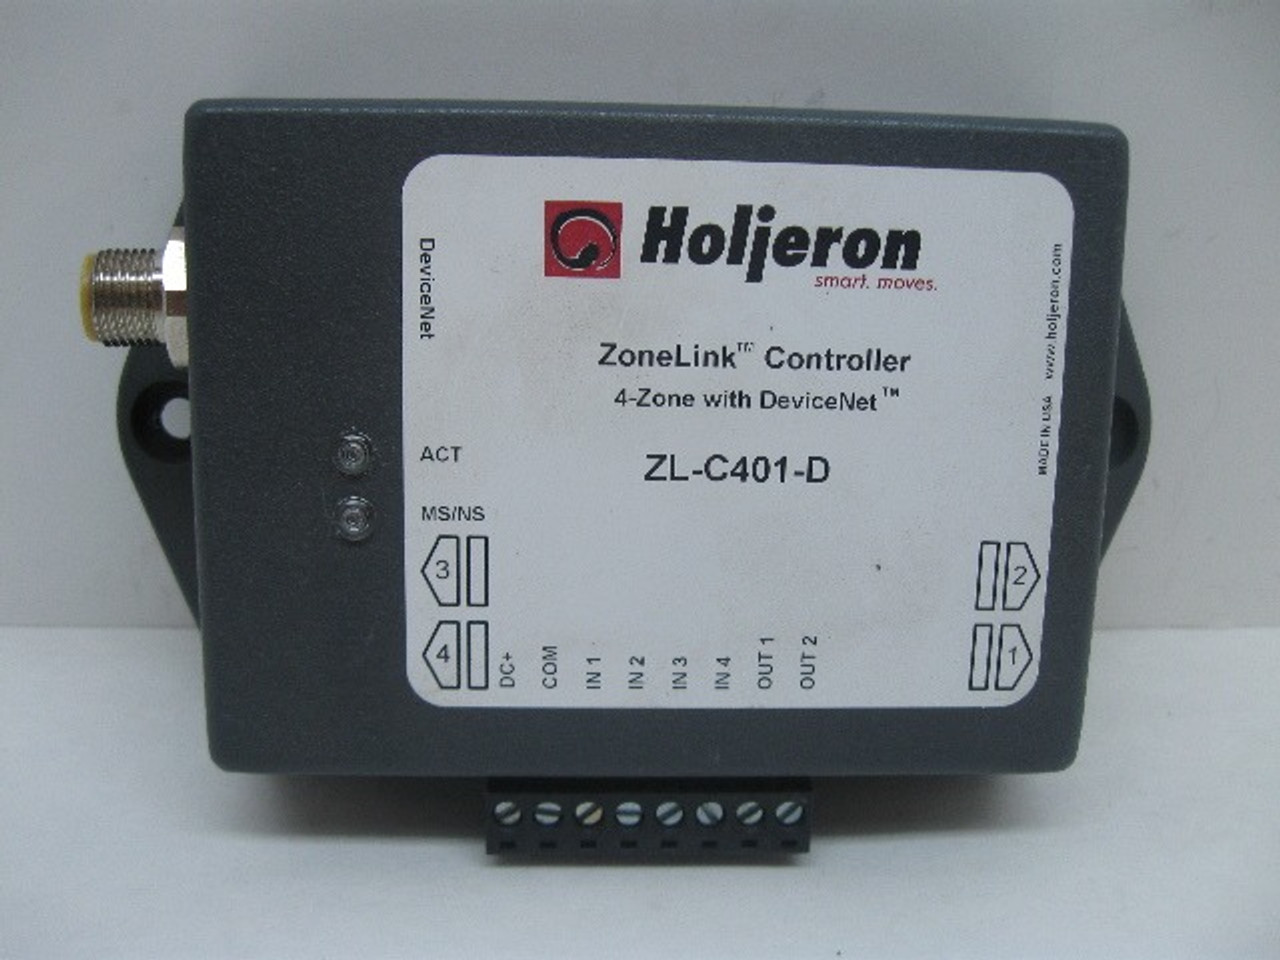 Holjeron ZL-C401-D ZoneLink Controller 4-Zone with DeviceNet